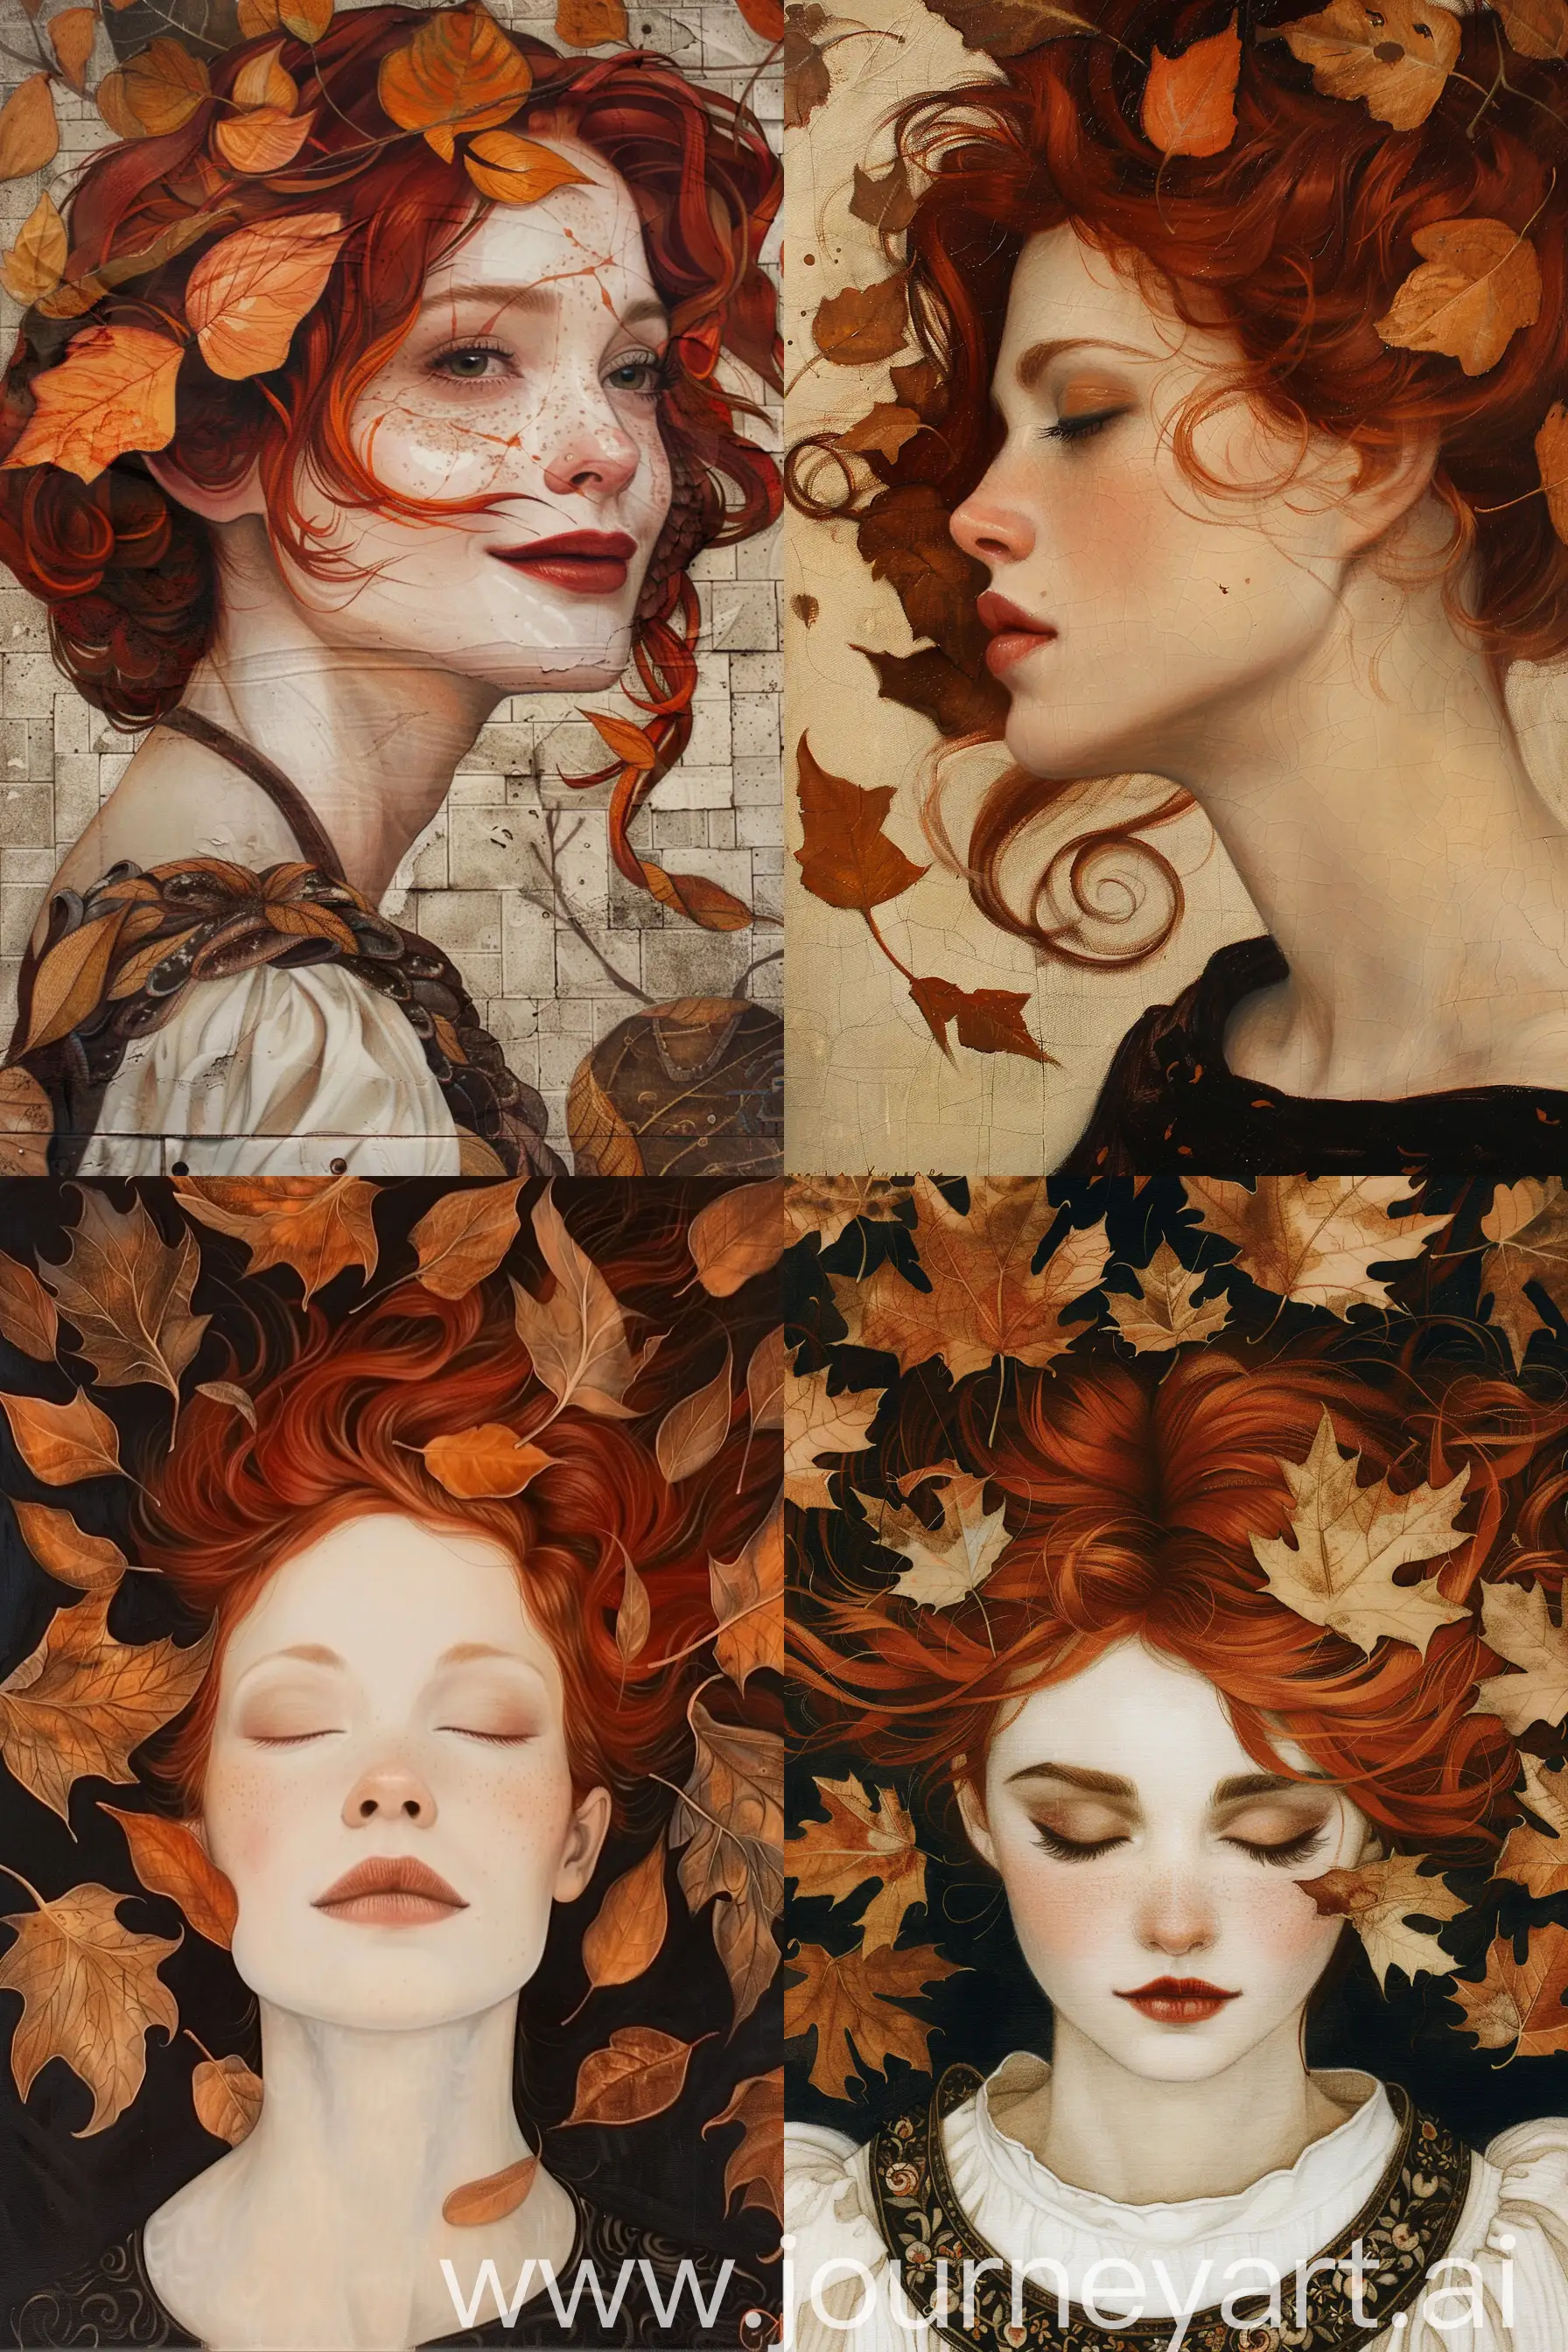 Charming-Woman-with-Red-Hair-in-Art-Deco-Style-Painting